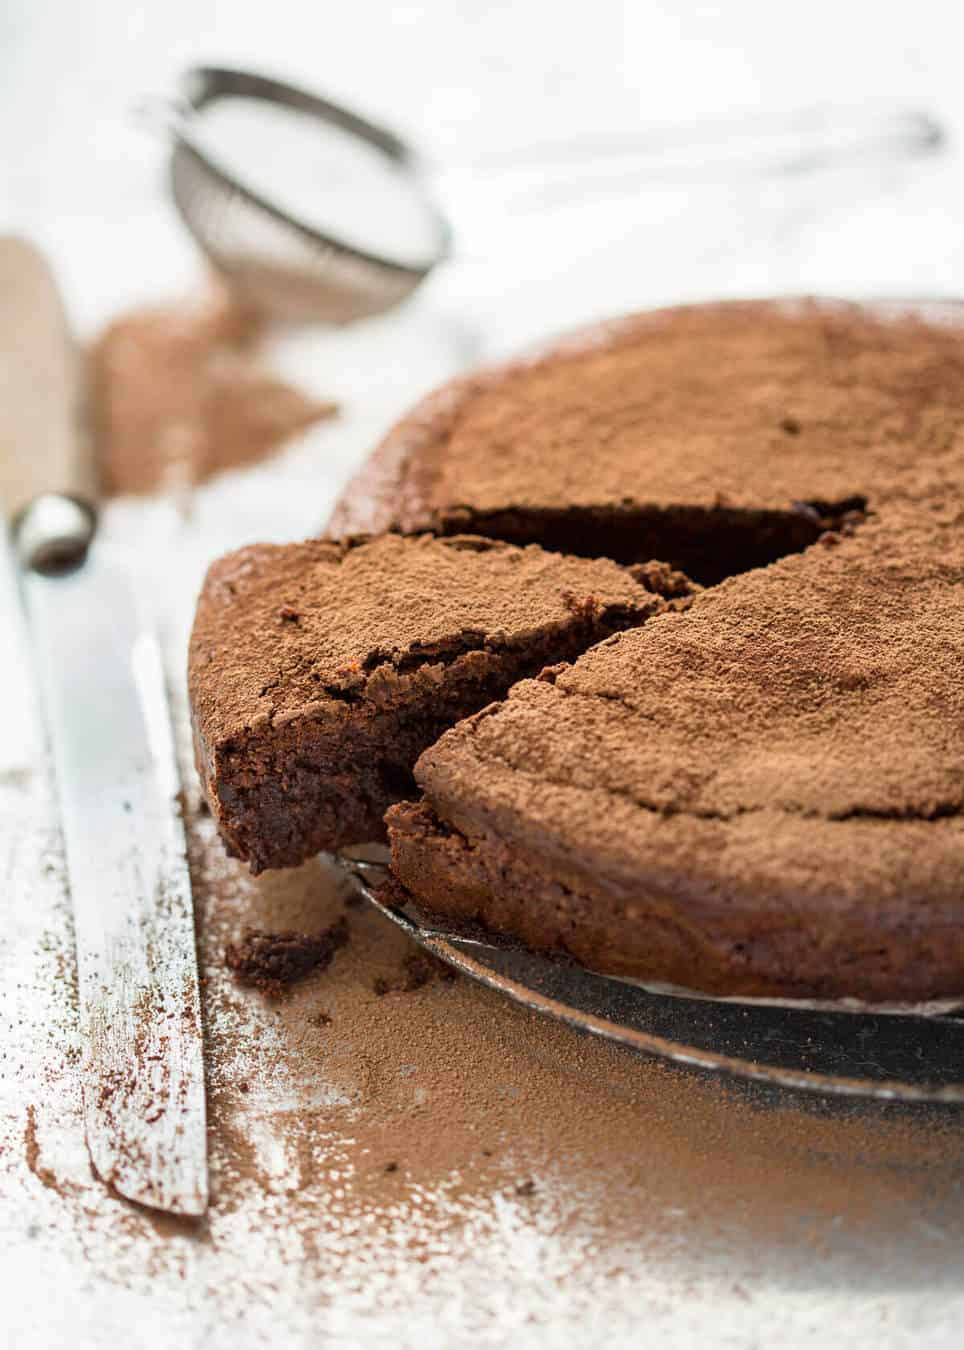 A simple Flourless Chocolate Cake made with almond meal / almond flour. Moist inside, with a thin crackly brownie-like surface. A stunning, very quick cake to make! www.recipetineats.com